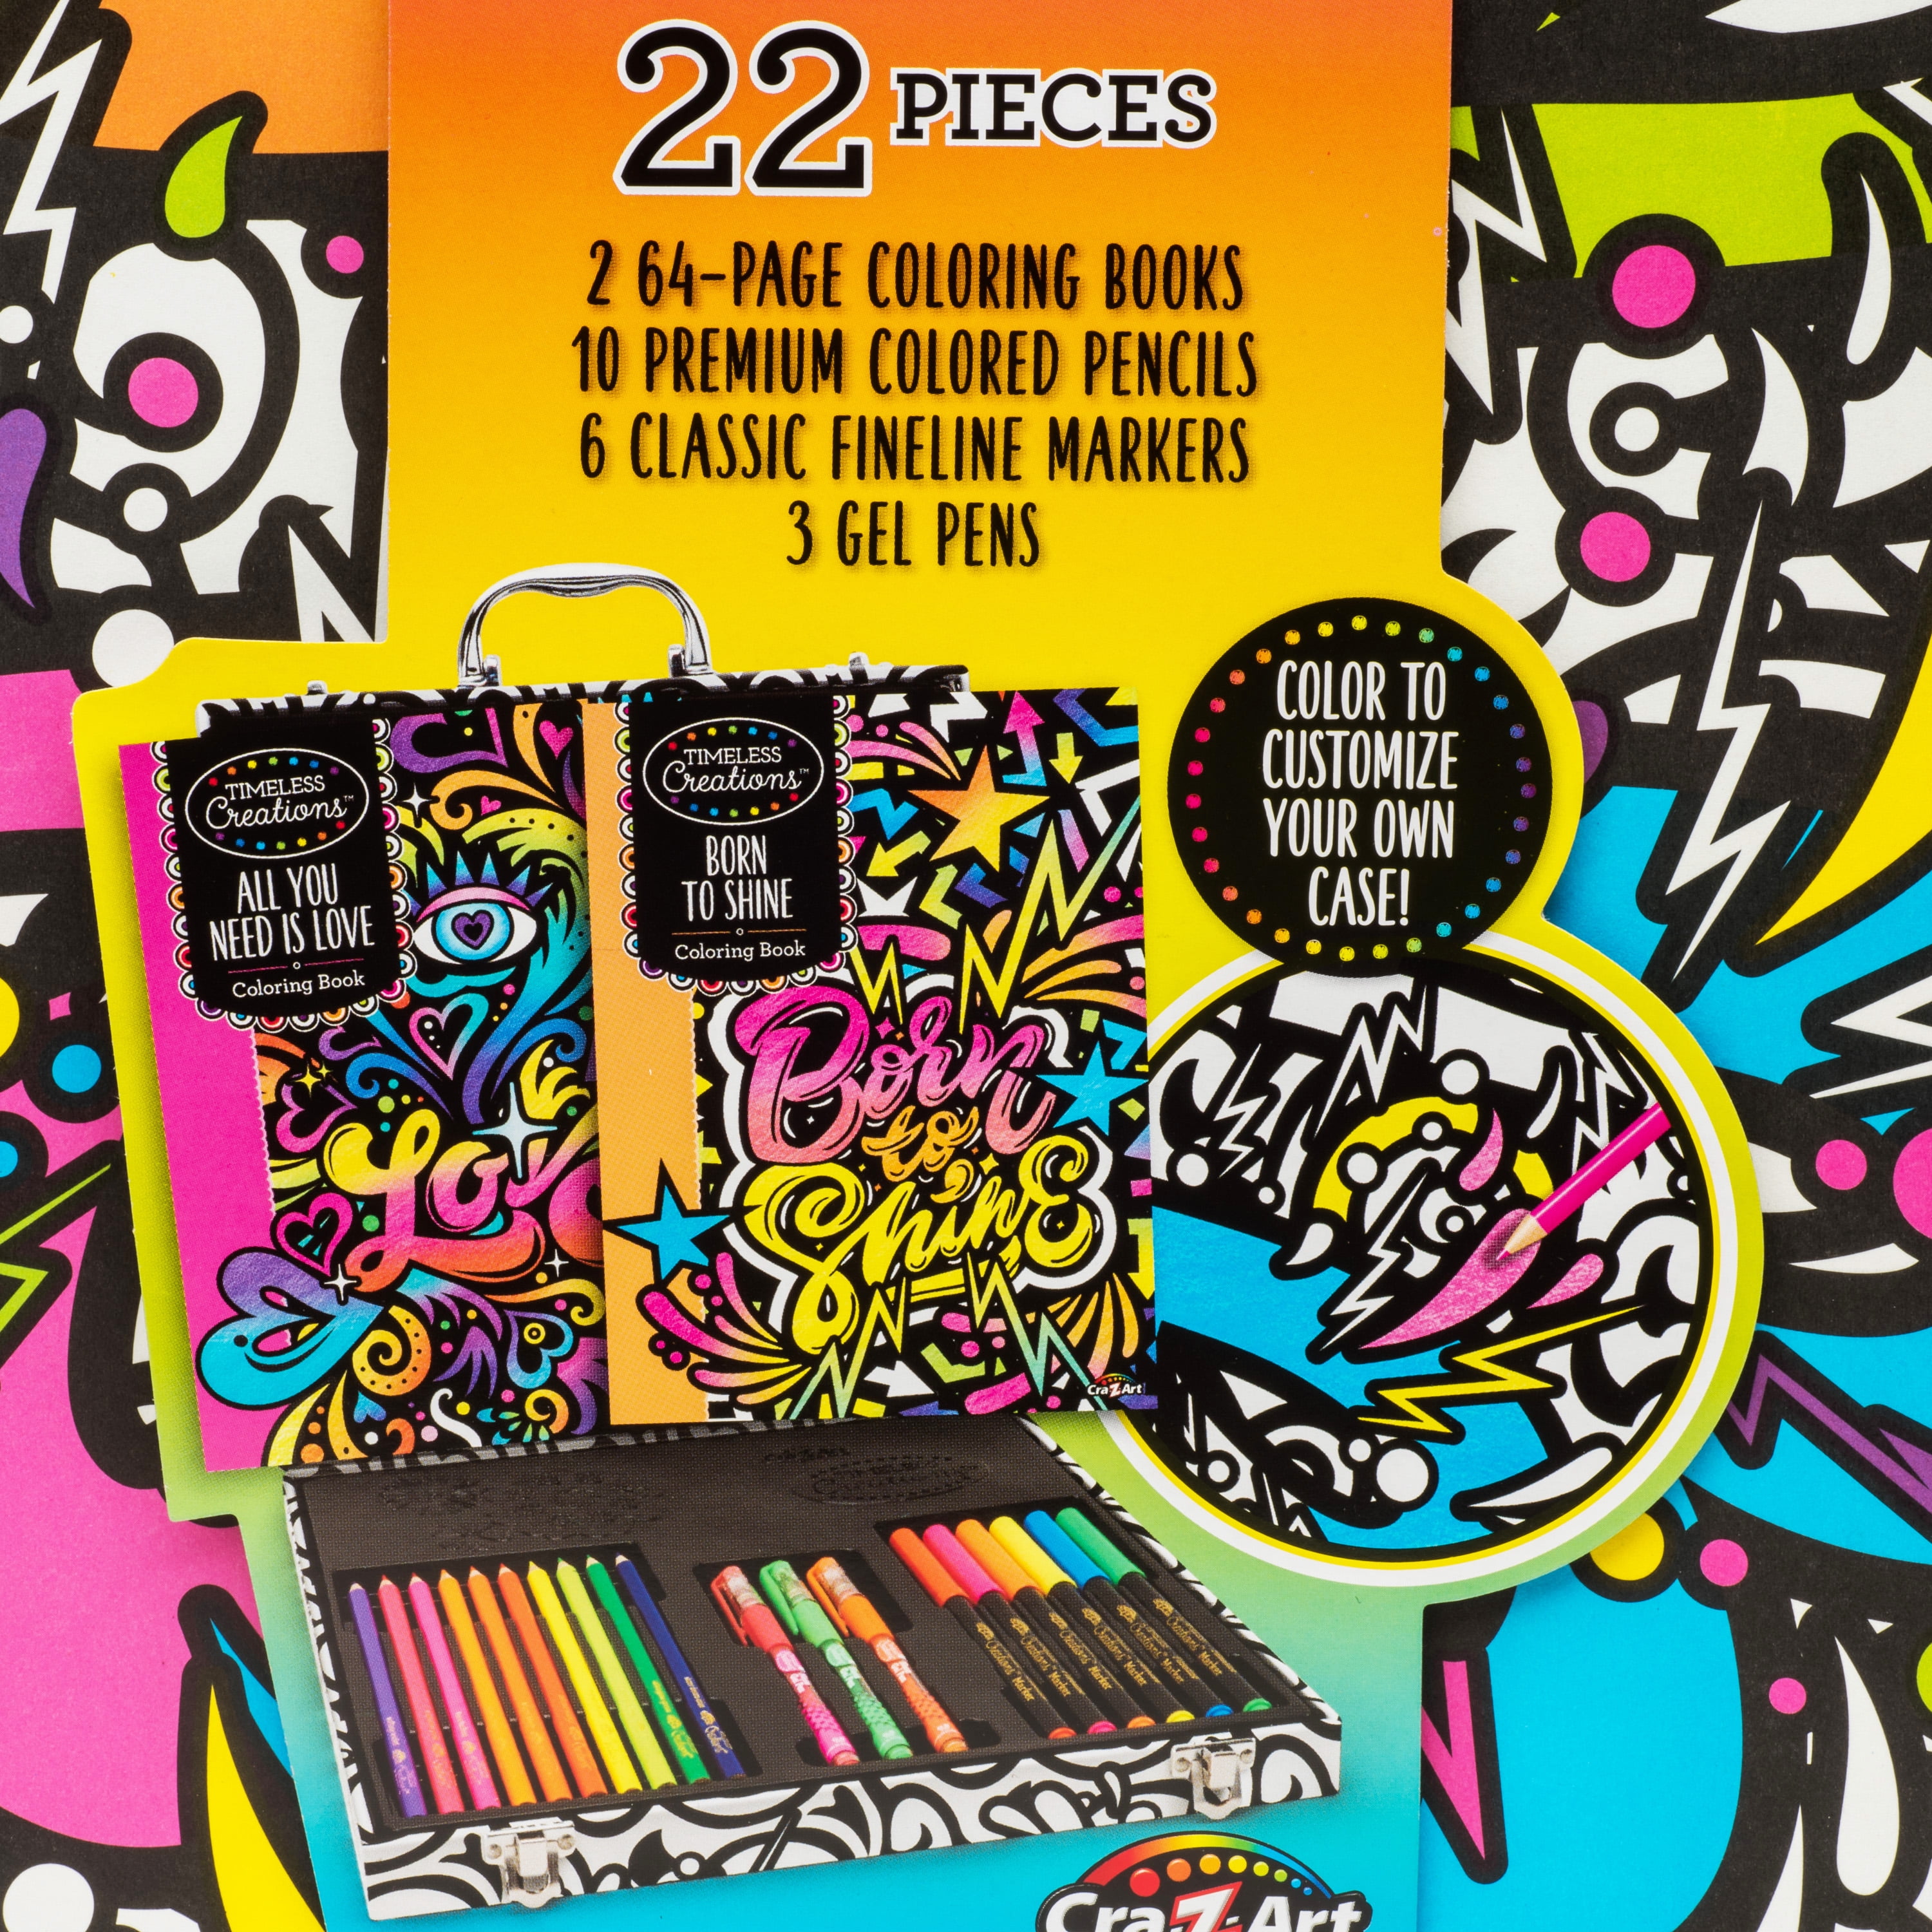 Timeless Creations Neon Coloring Case by Cra-Z-Art at Fleet Farm